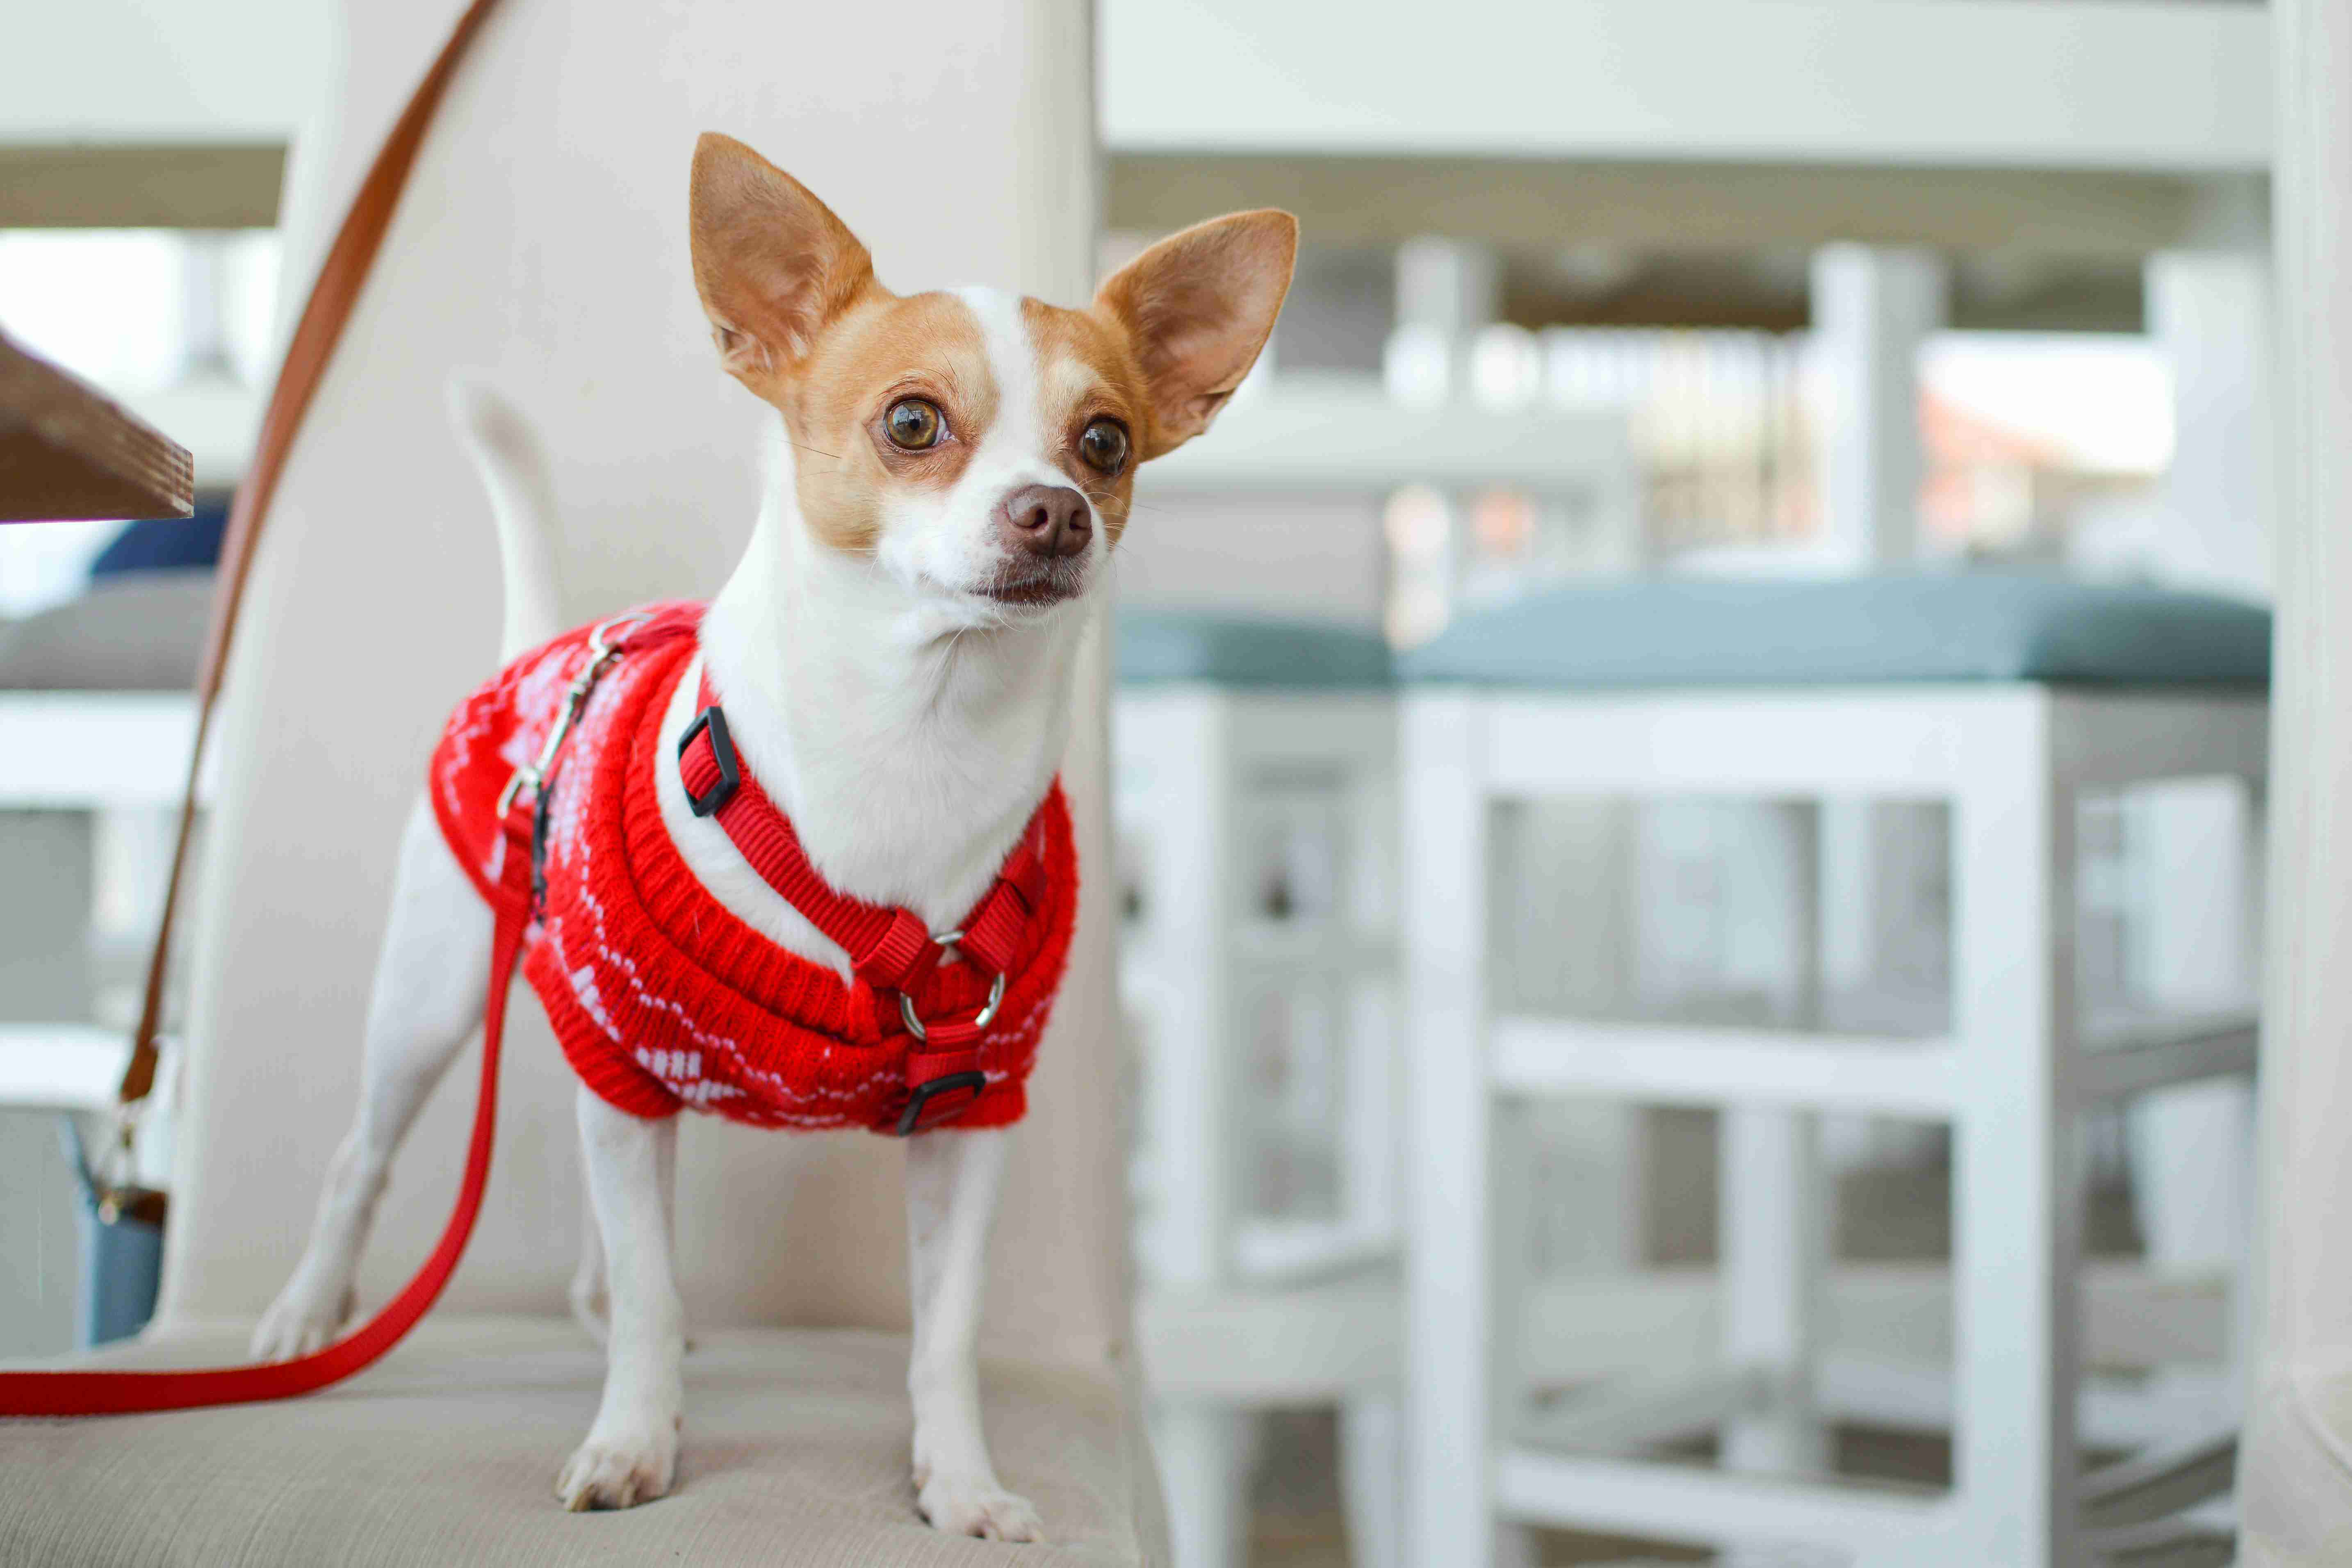 Can Chihuahuas become aggressive due to boredom or lack of exercise?